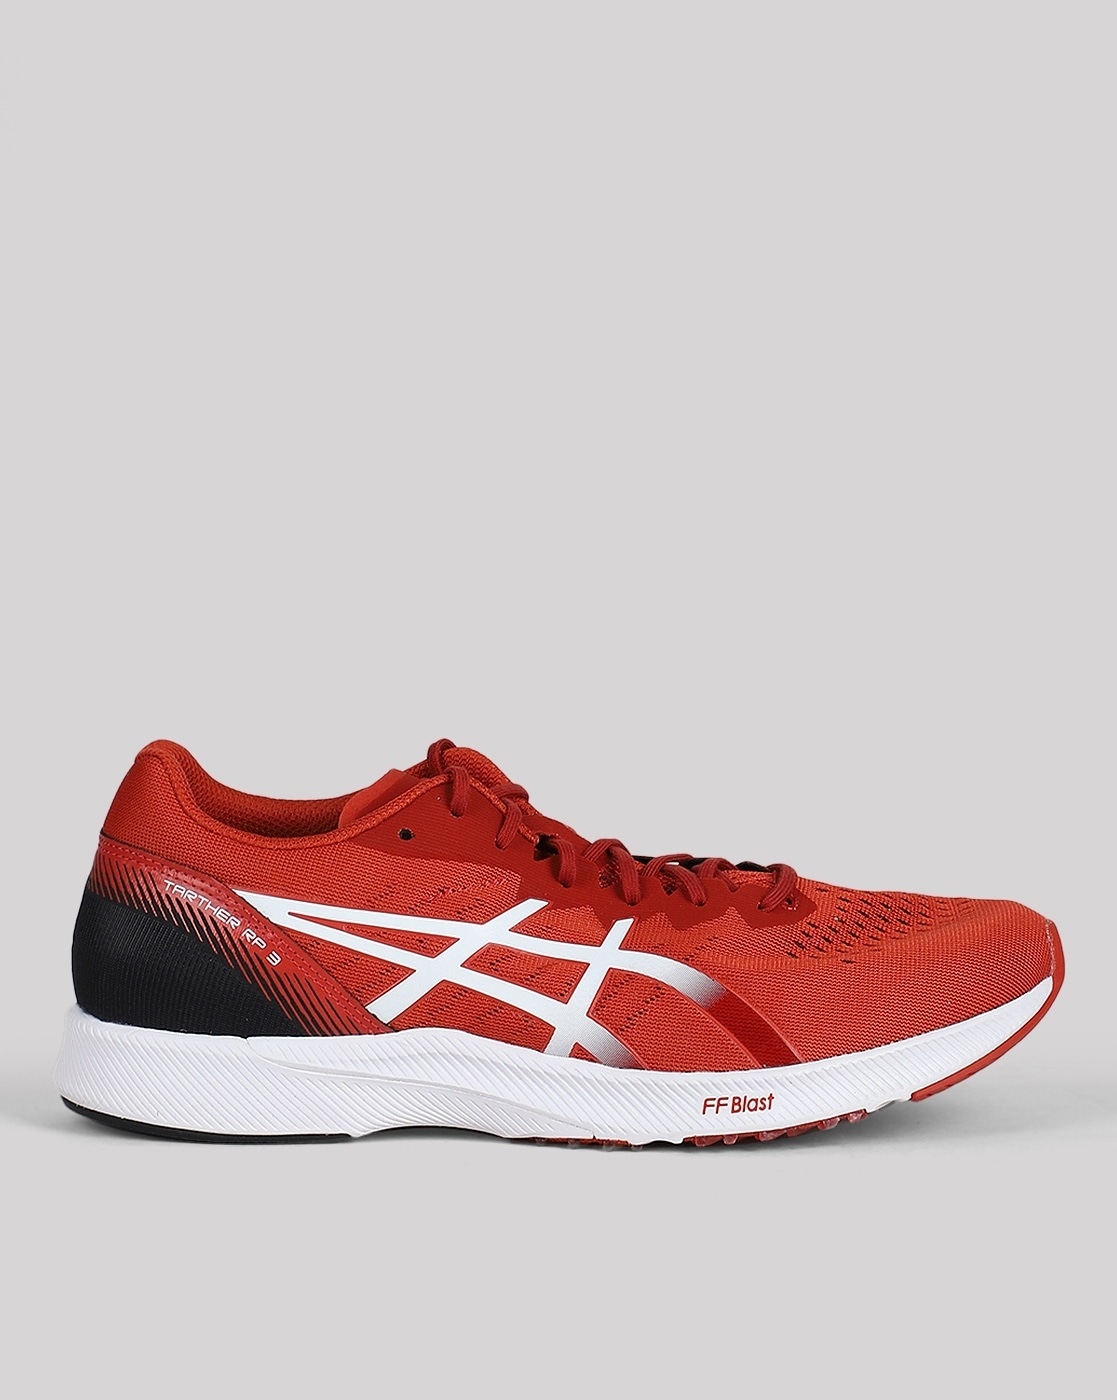 Asics Magic Speed 3 Review: Third Time's a Charm